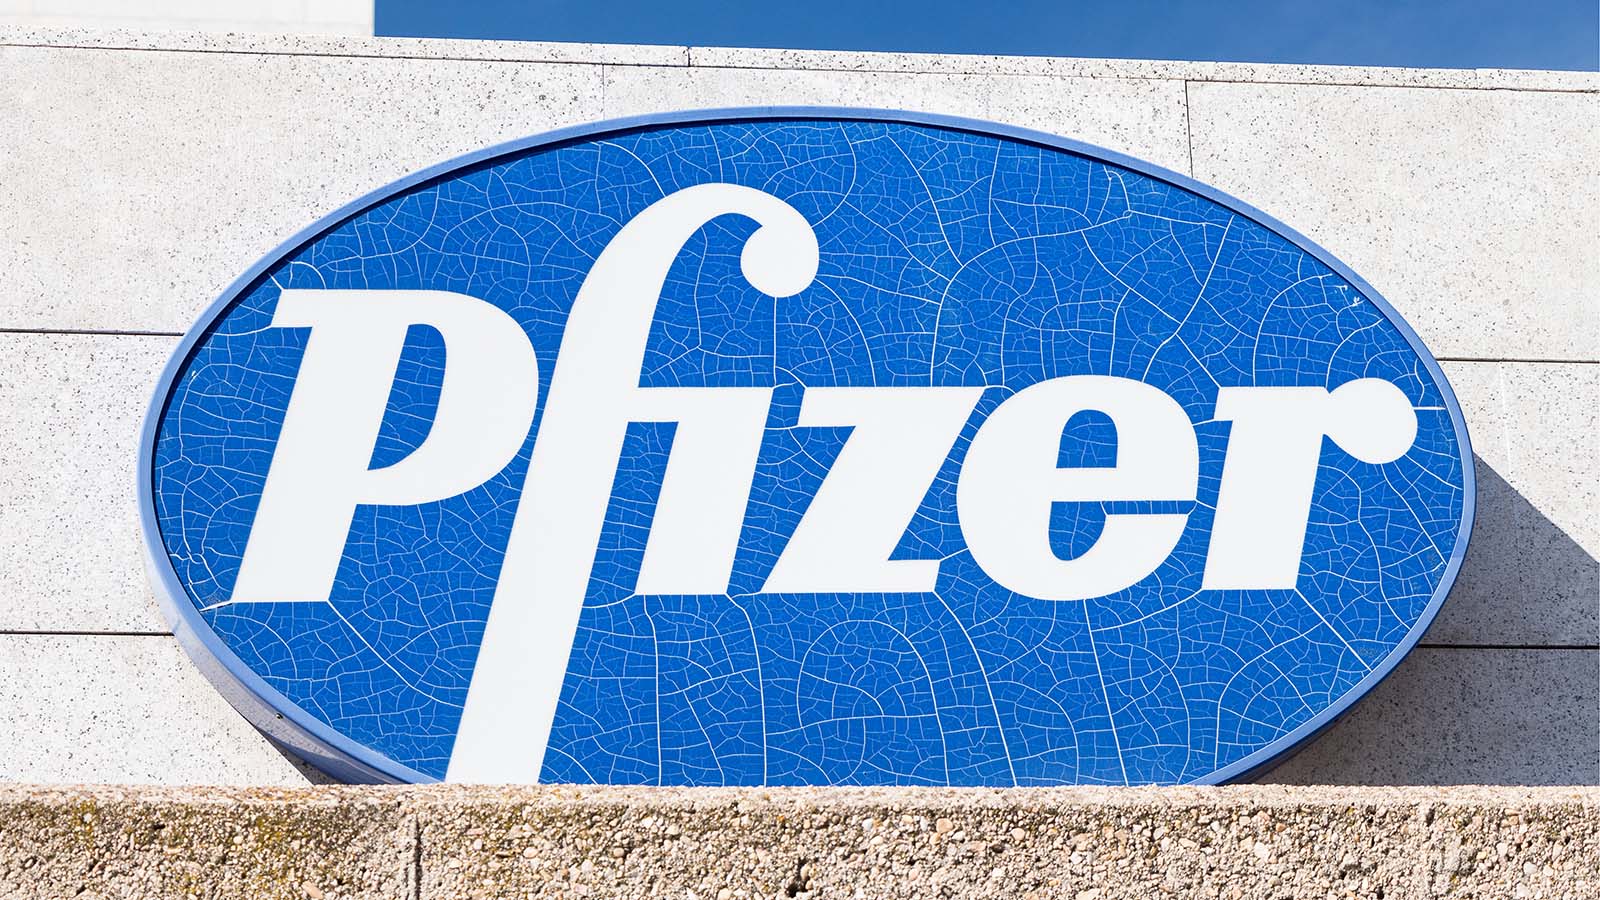 Pfizer (PFE) logo on Pfizer building. Pfizer is an American pharmaceutical corporation representing a deal for VALN stock.